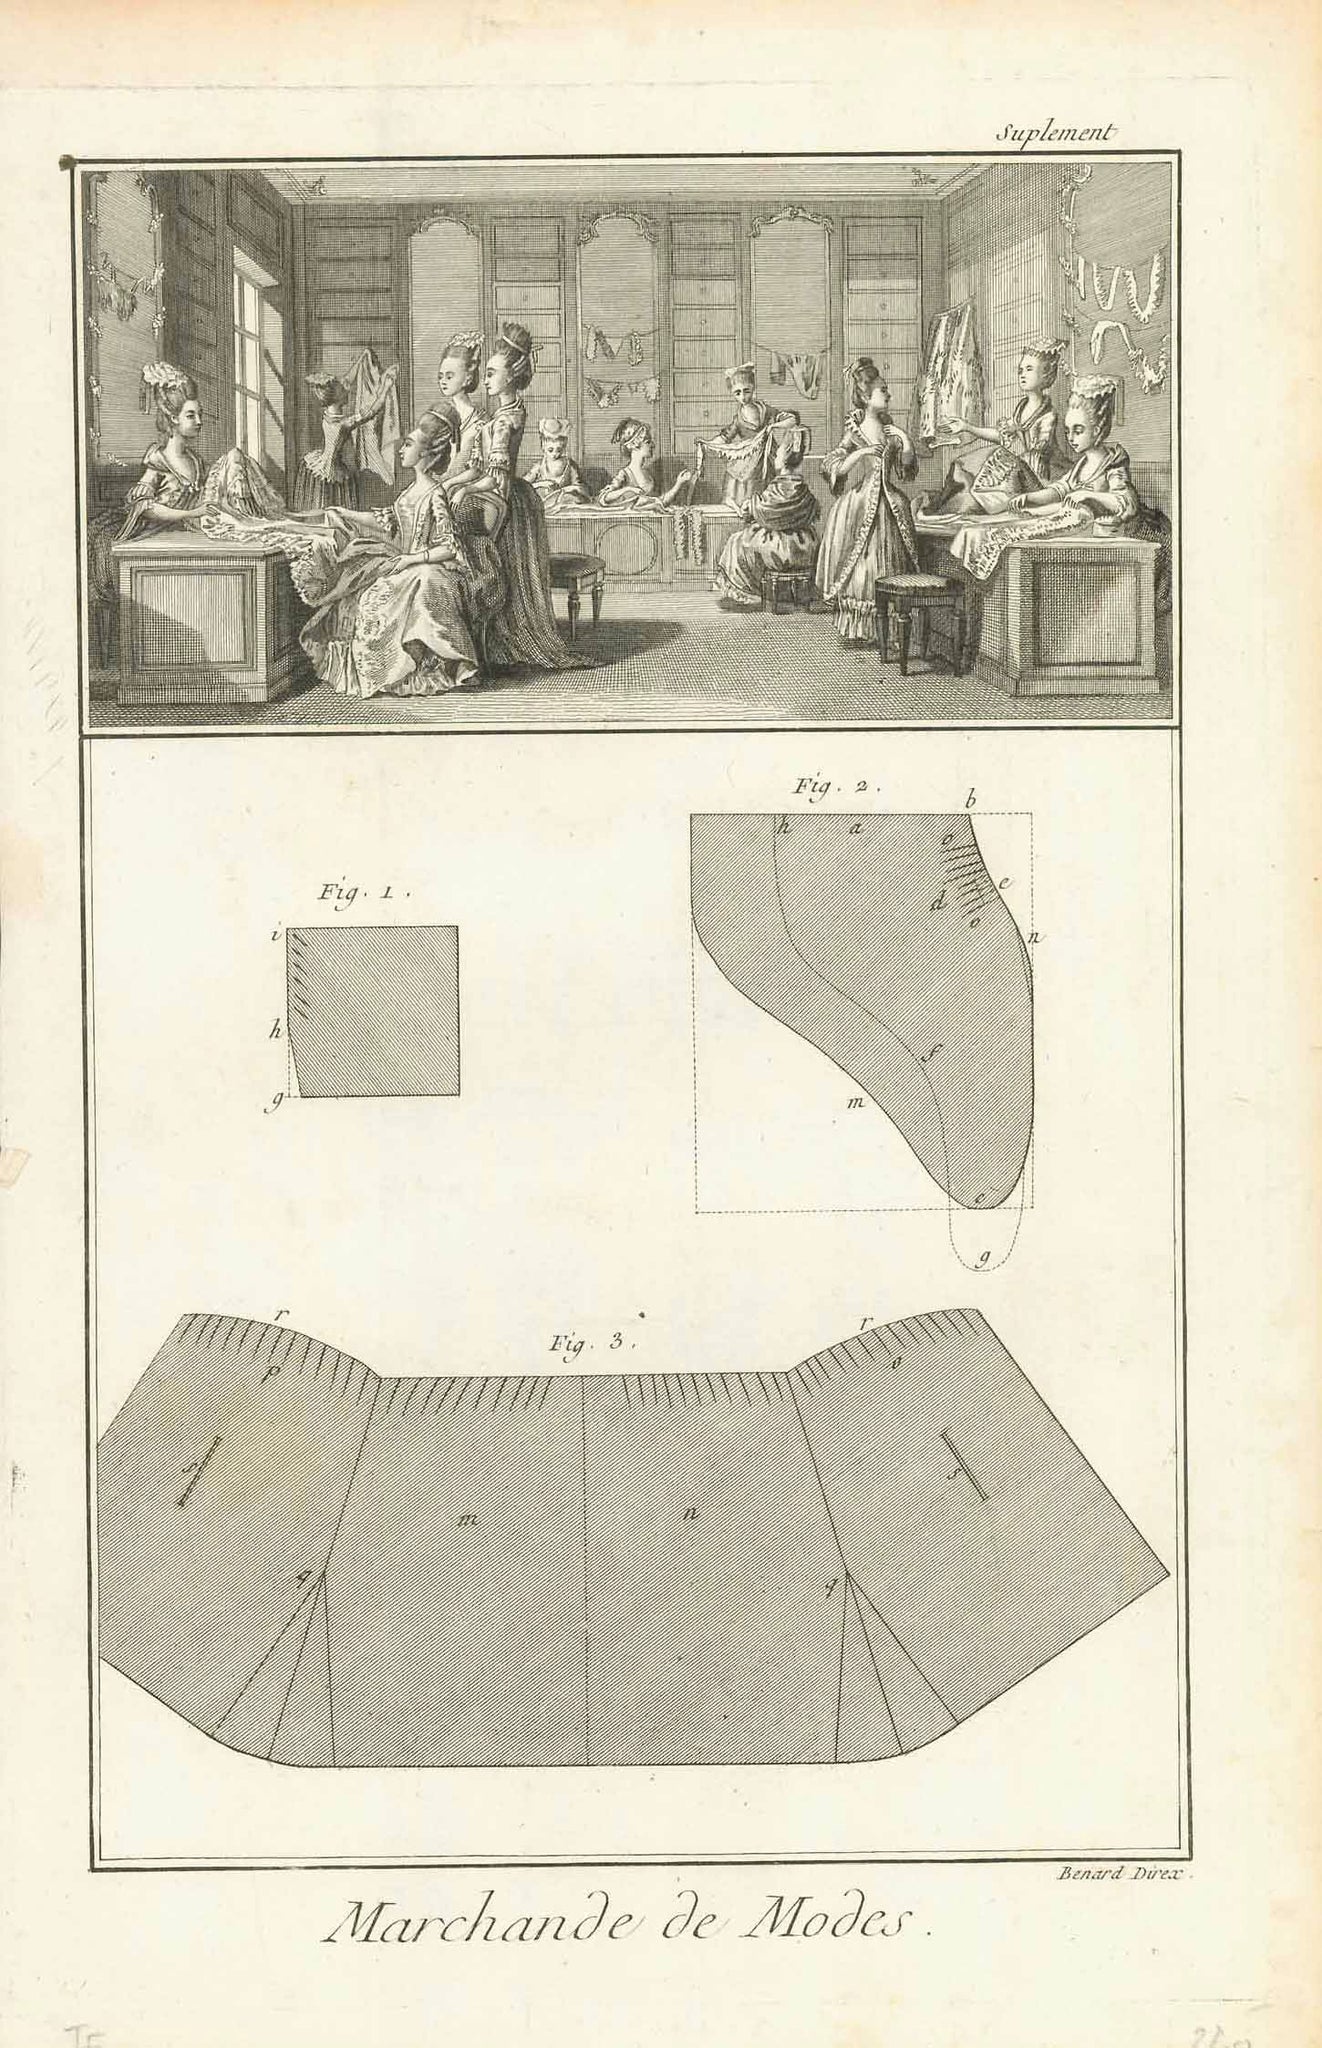 "Marchande de Mode"  (Ladies Fashion, Boutique)  Copper etching by Robert Bernard (1734-1777)  Published in  "Encyclopedie" by Denis Diderot (1713-1784)   and Jean-Baptiste le Rond d'Alembert (1717-1783)   Paris, 1751-1780 - (36 volumes)  Lively scene in a ladies fashion boutique. Below: A sewing pattern., interior design, wall decoration, ideas, idea, gift ideas, present, vintage, charming, special, decoration, home interior, living room design